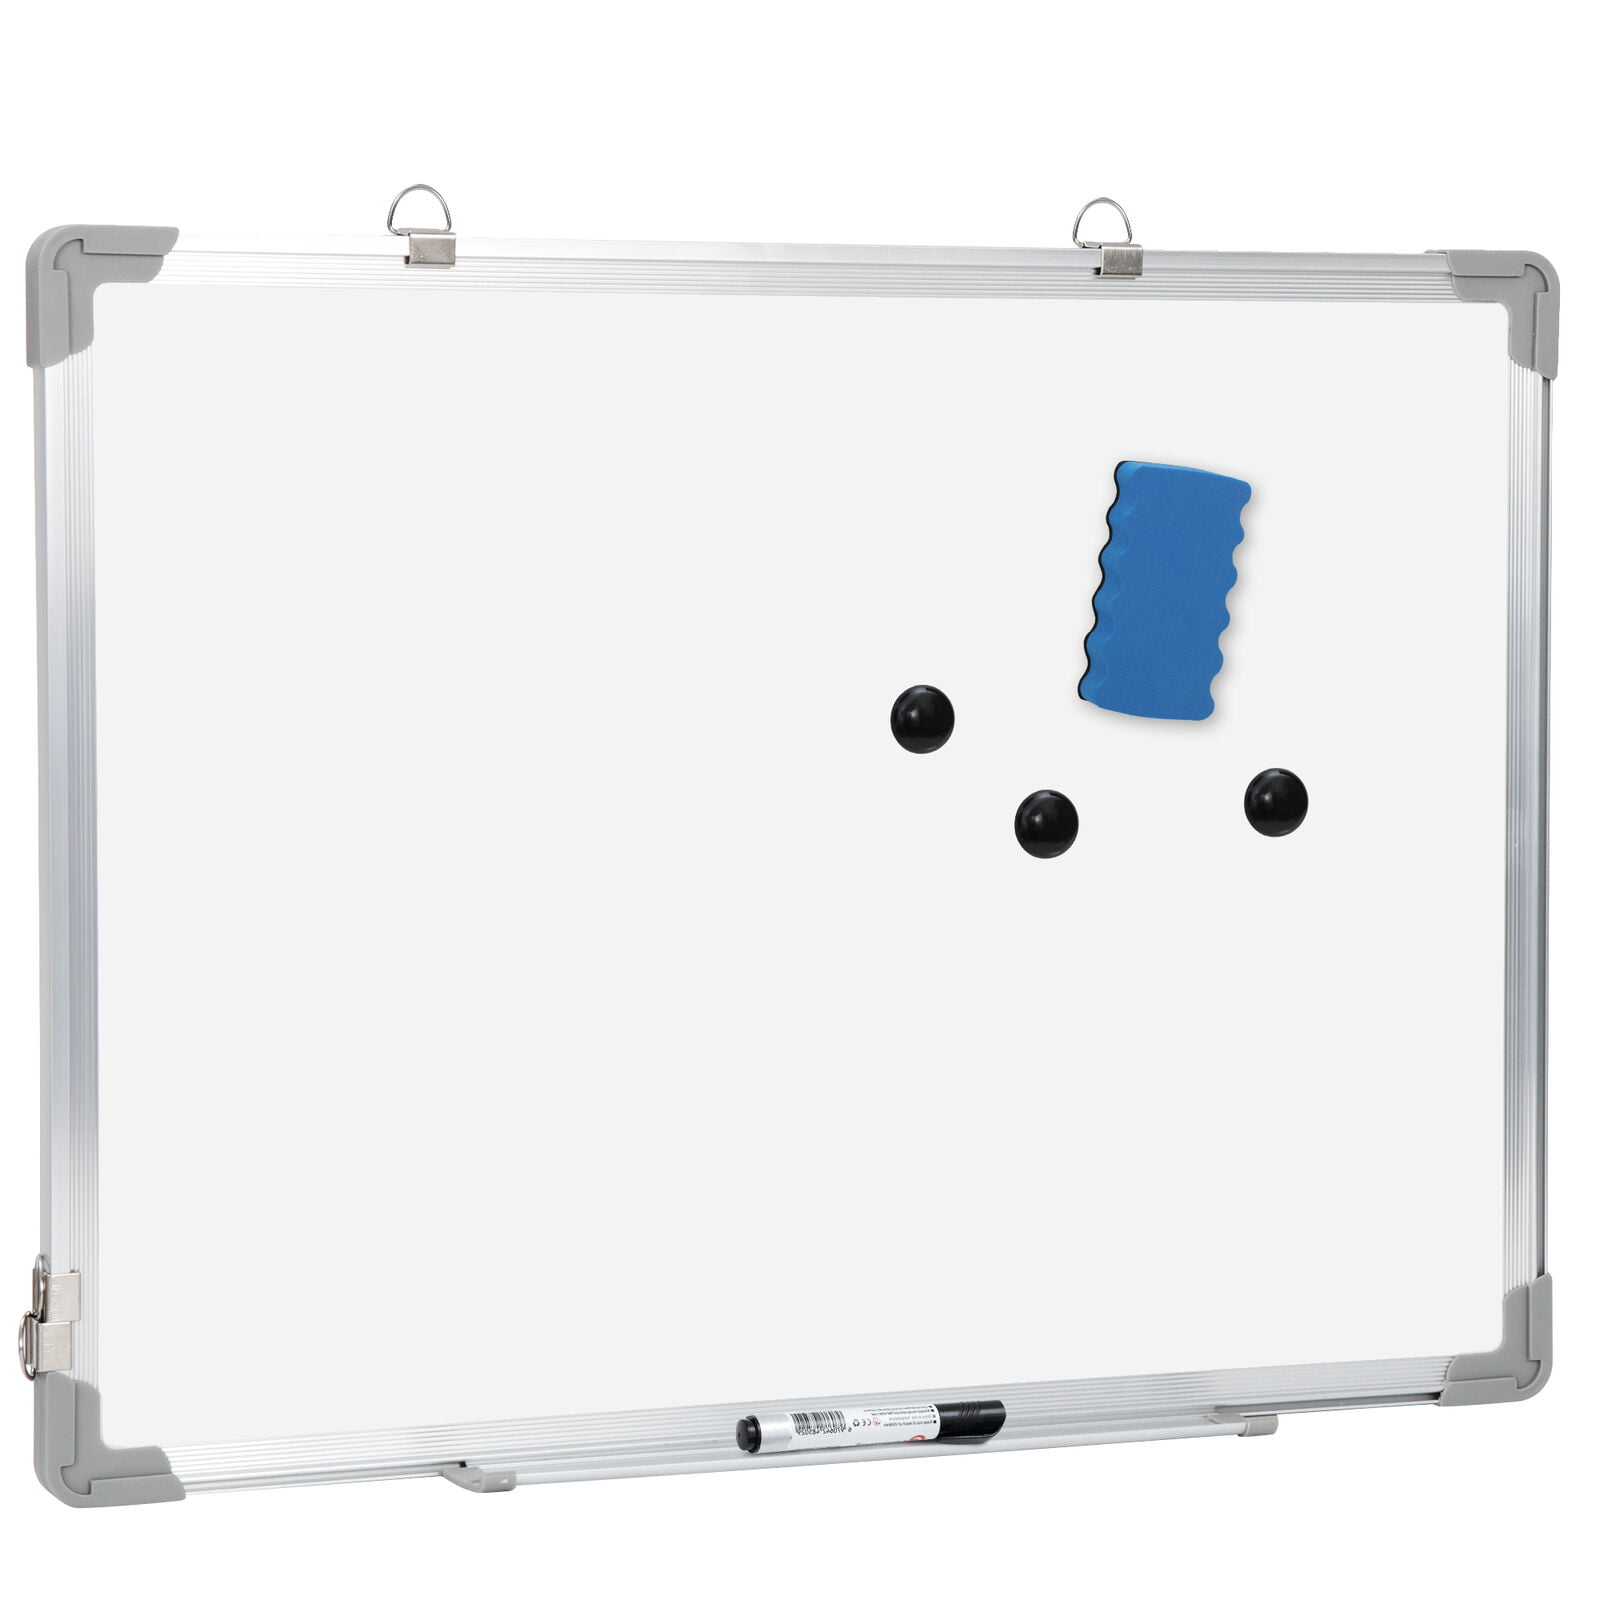 Dry Erase White Board Wall Hanging Board Magnetic Whiteboard 36 x 24 inch 